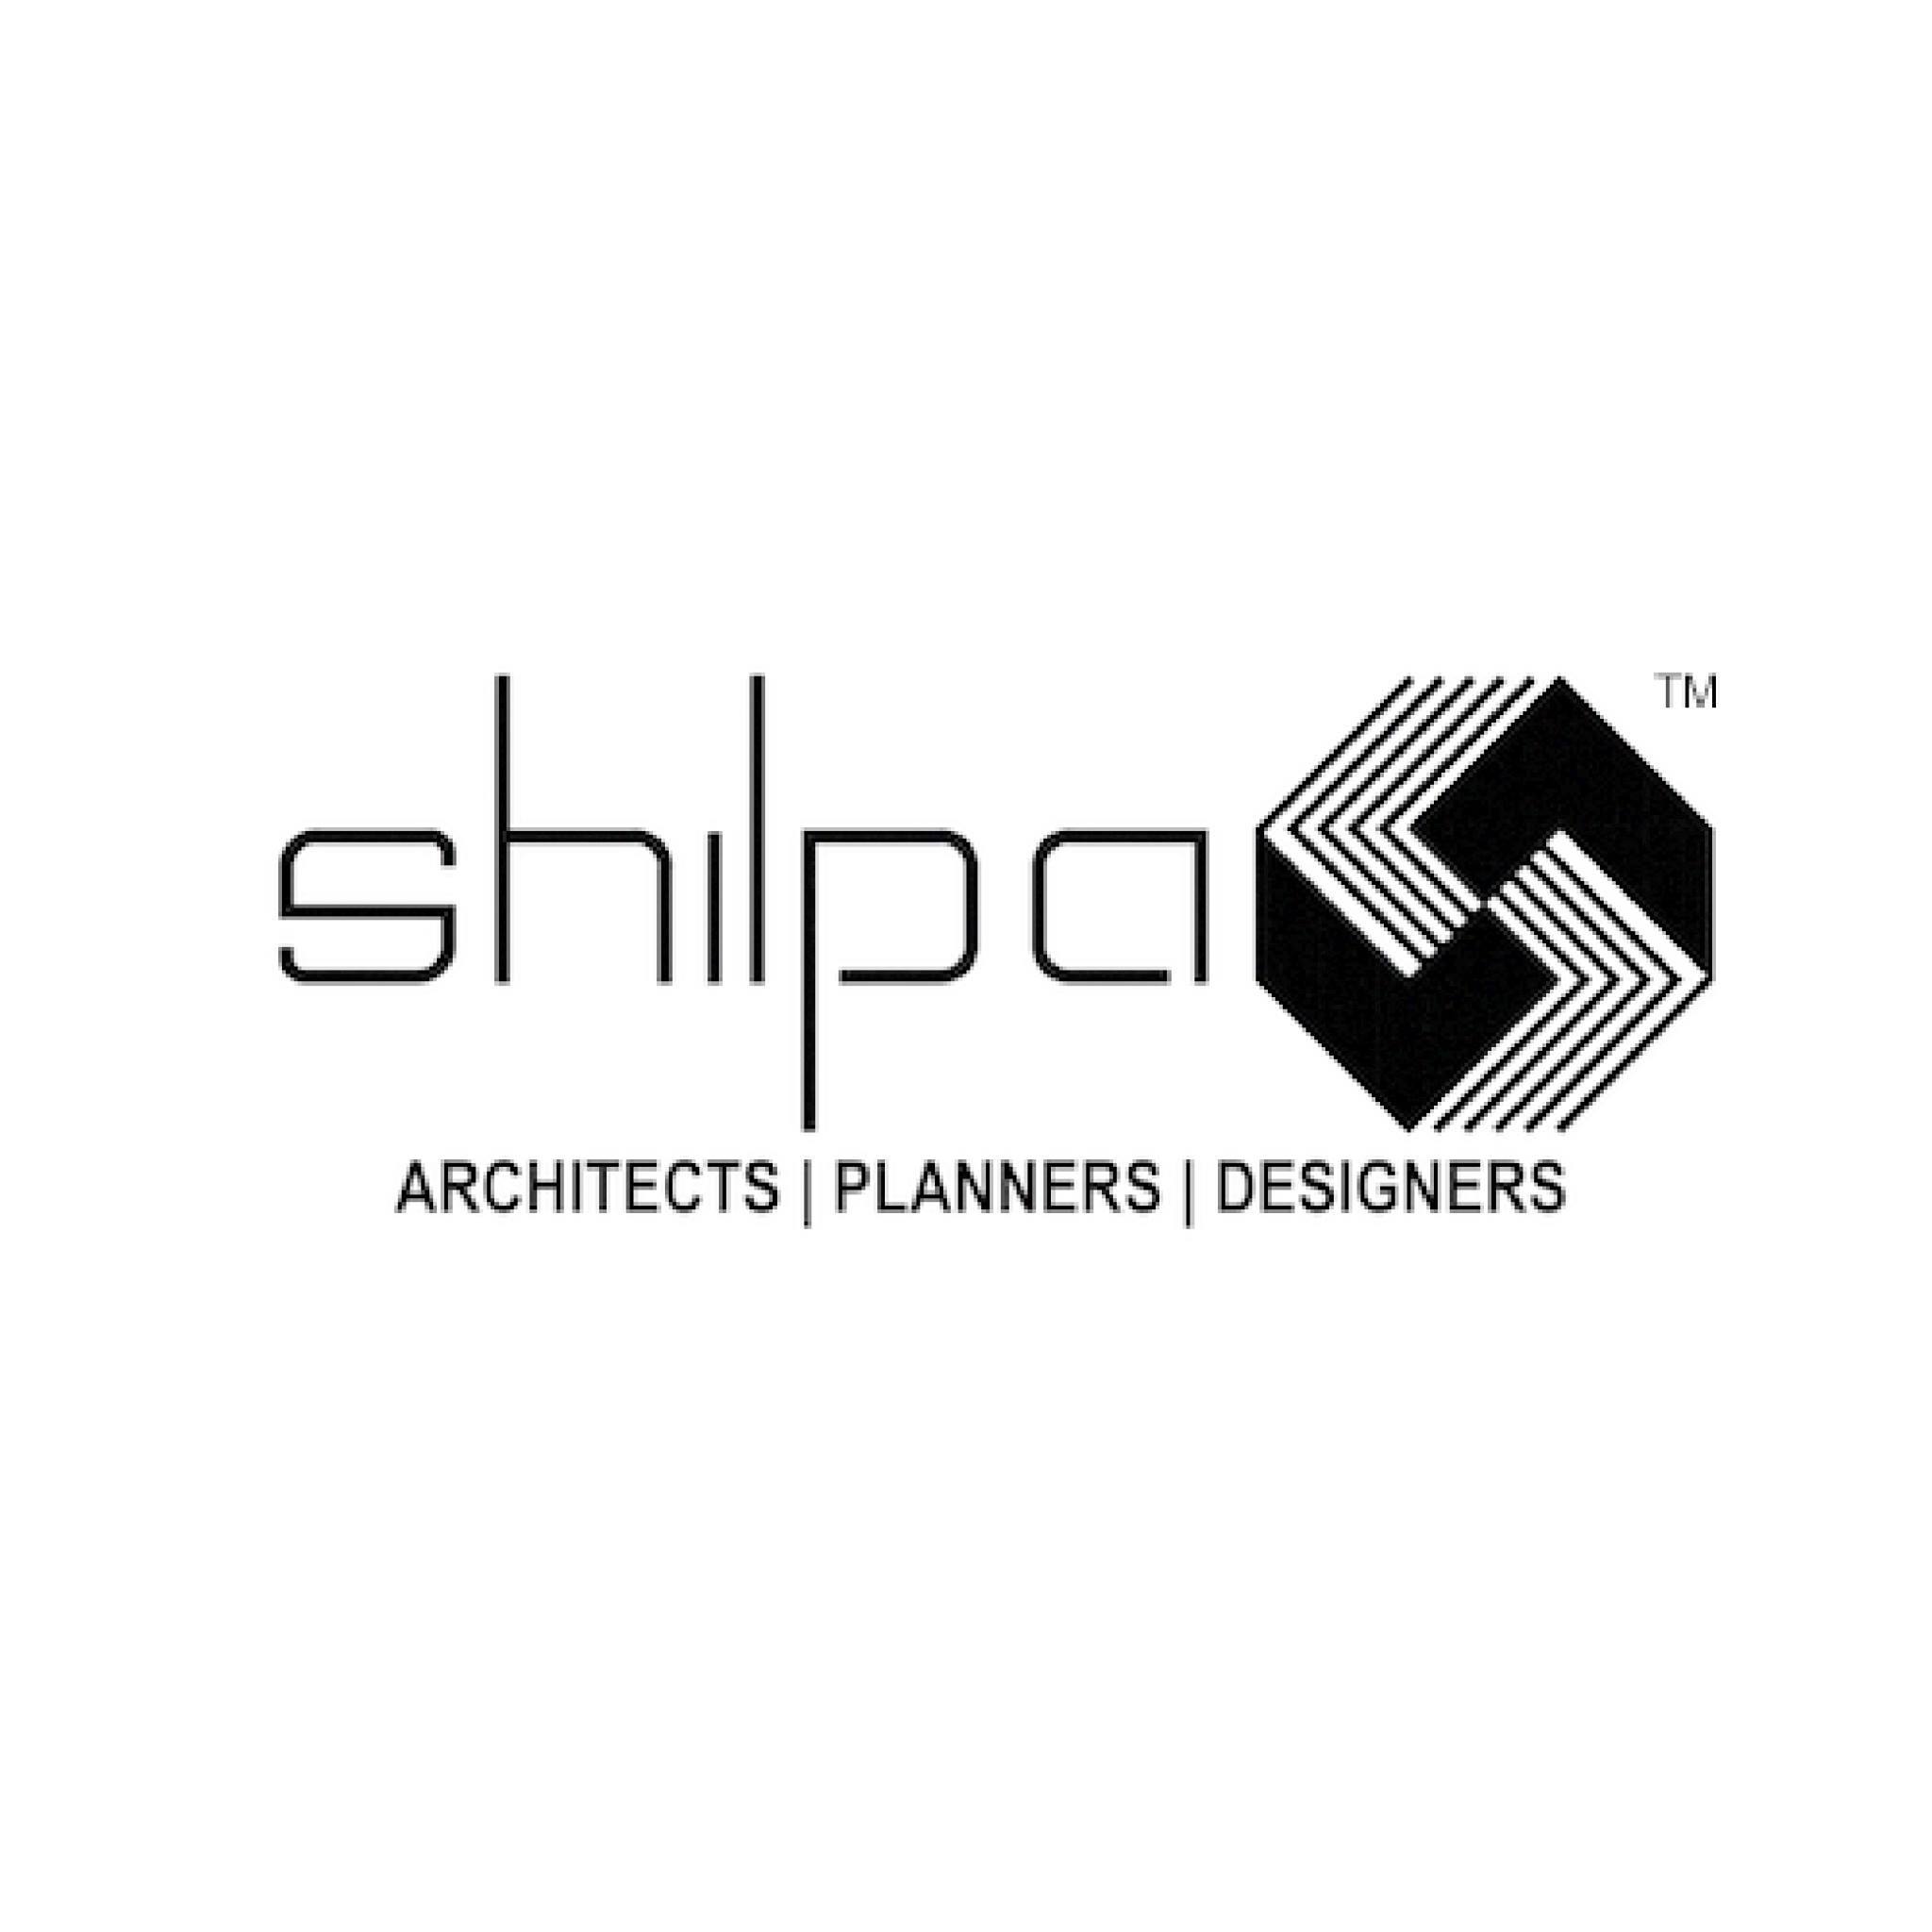 Shilpa Architects Planners Designers|IT Services|Professional Services